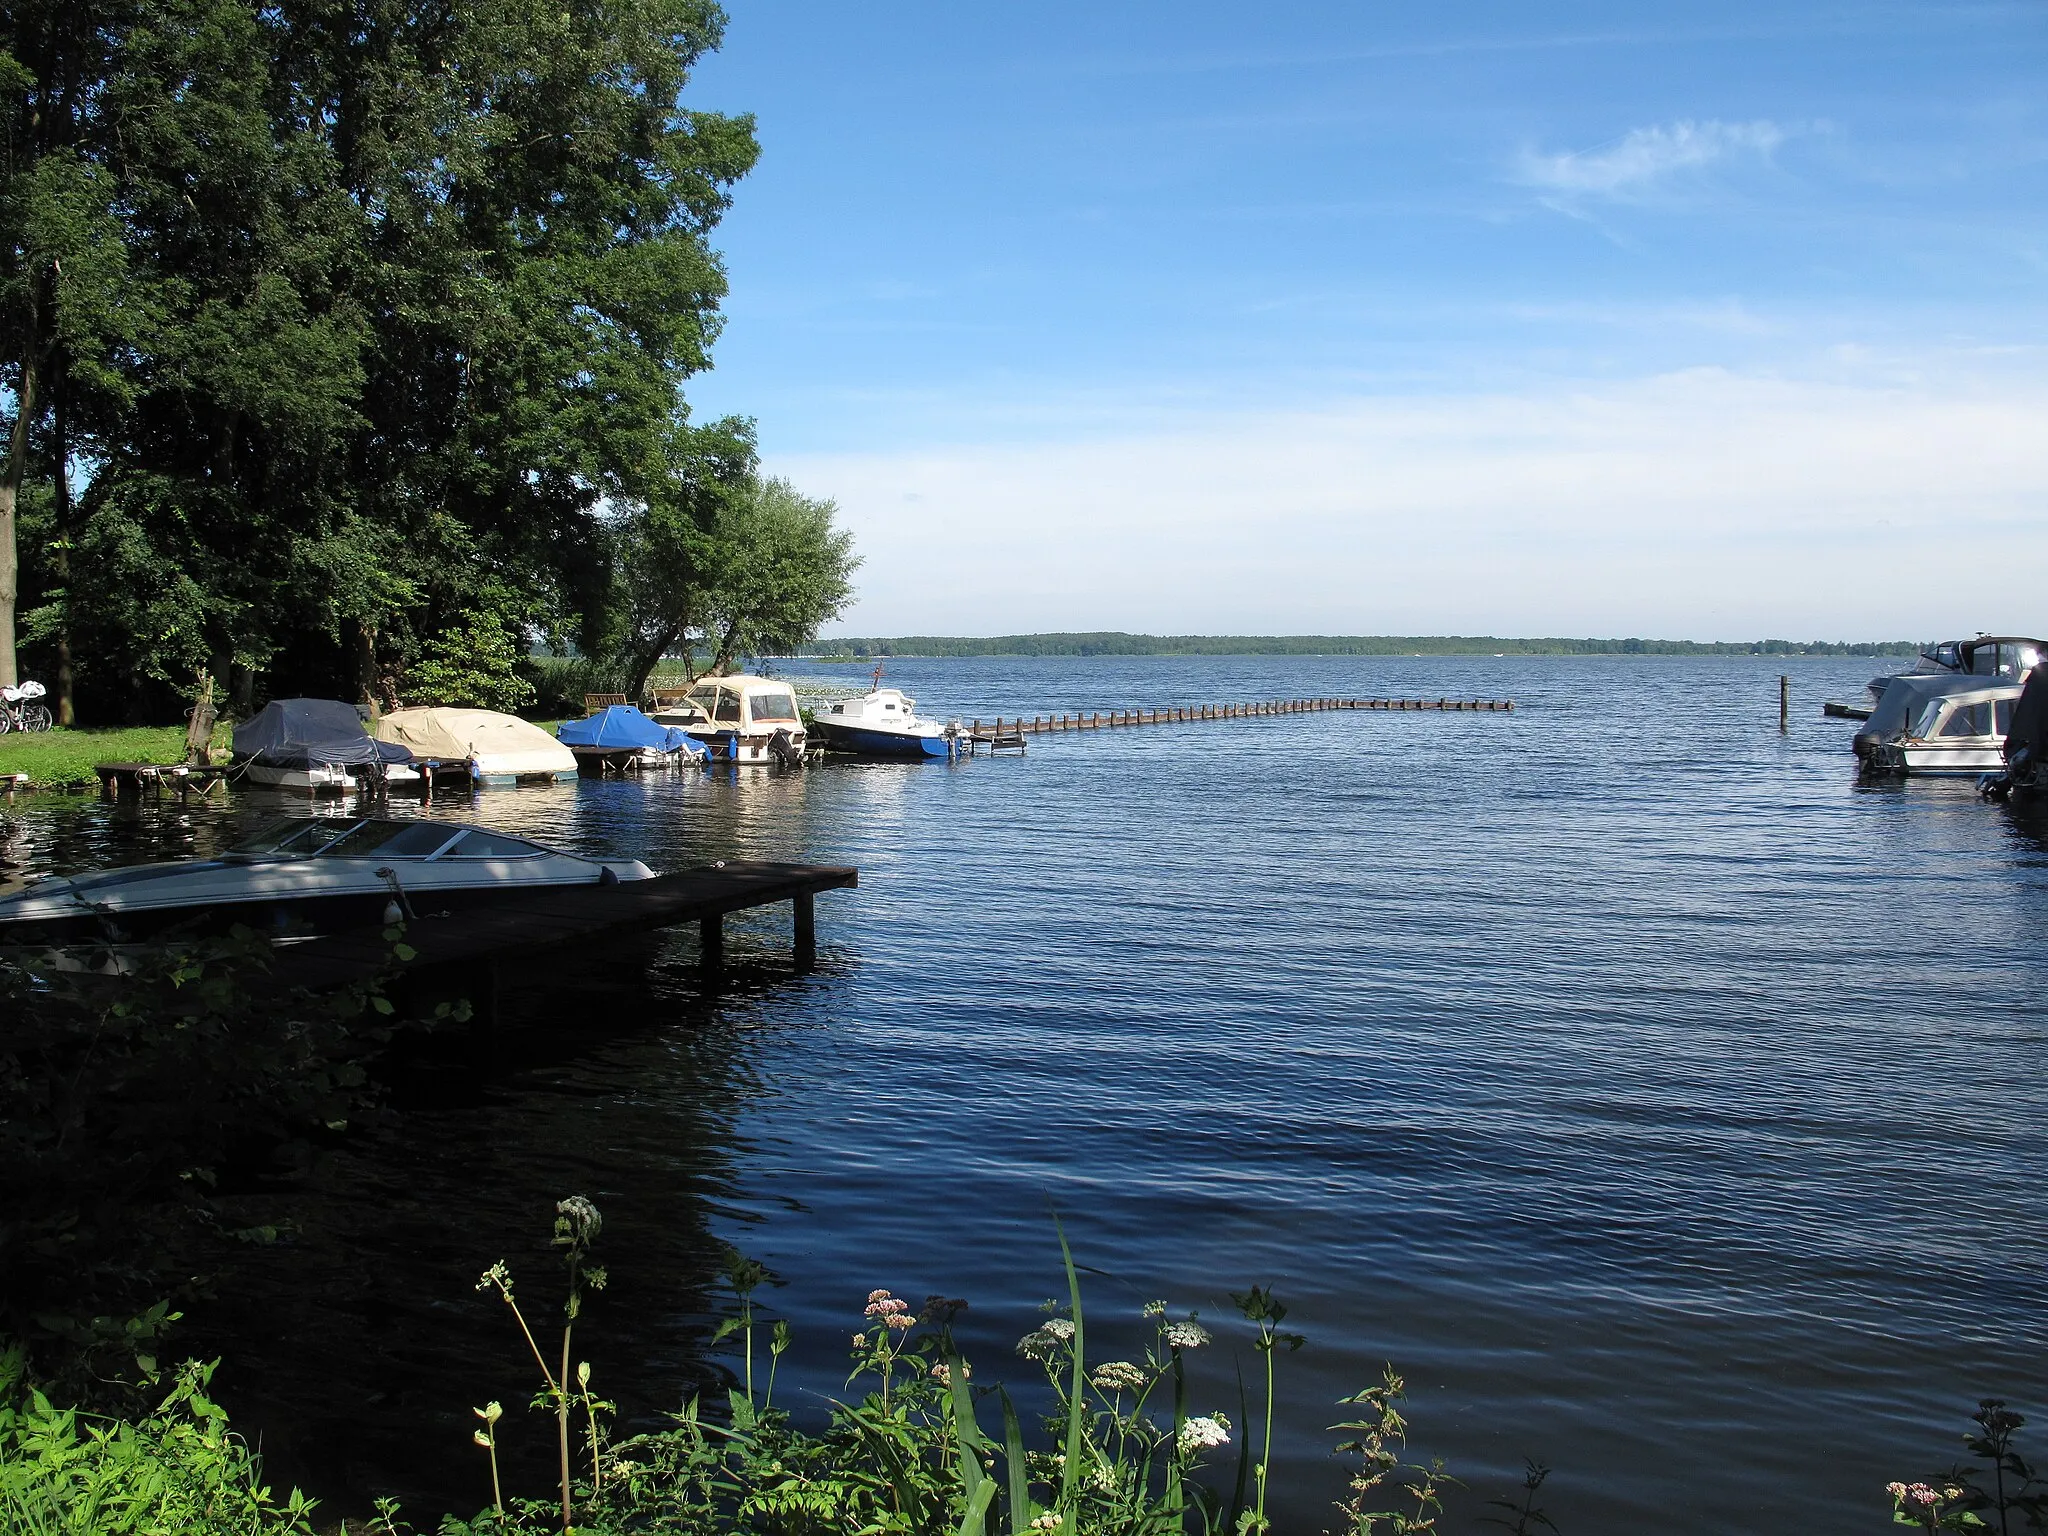 Photo showing: The Wolziger See is a lake in Heidesee, District Dahme-Spreewald, Brandenburg, Germany. The lake covers 597 hectare and has a depth of max. 13 meters. It is situated in the Dahme-Heideseen Nature Park. Shown here: view from the south-eastern shore in Görsdorf at the confluence of the Köllnitzer Fließ/Mühlenfließ.